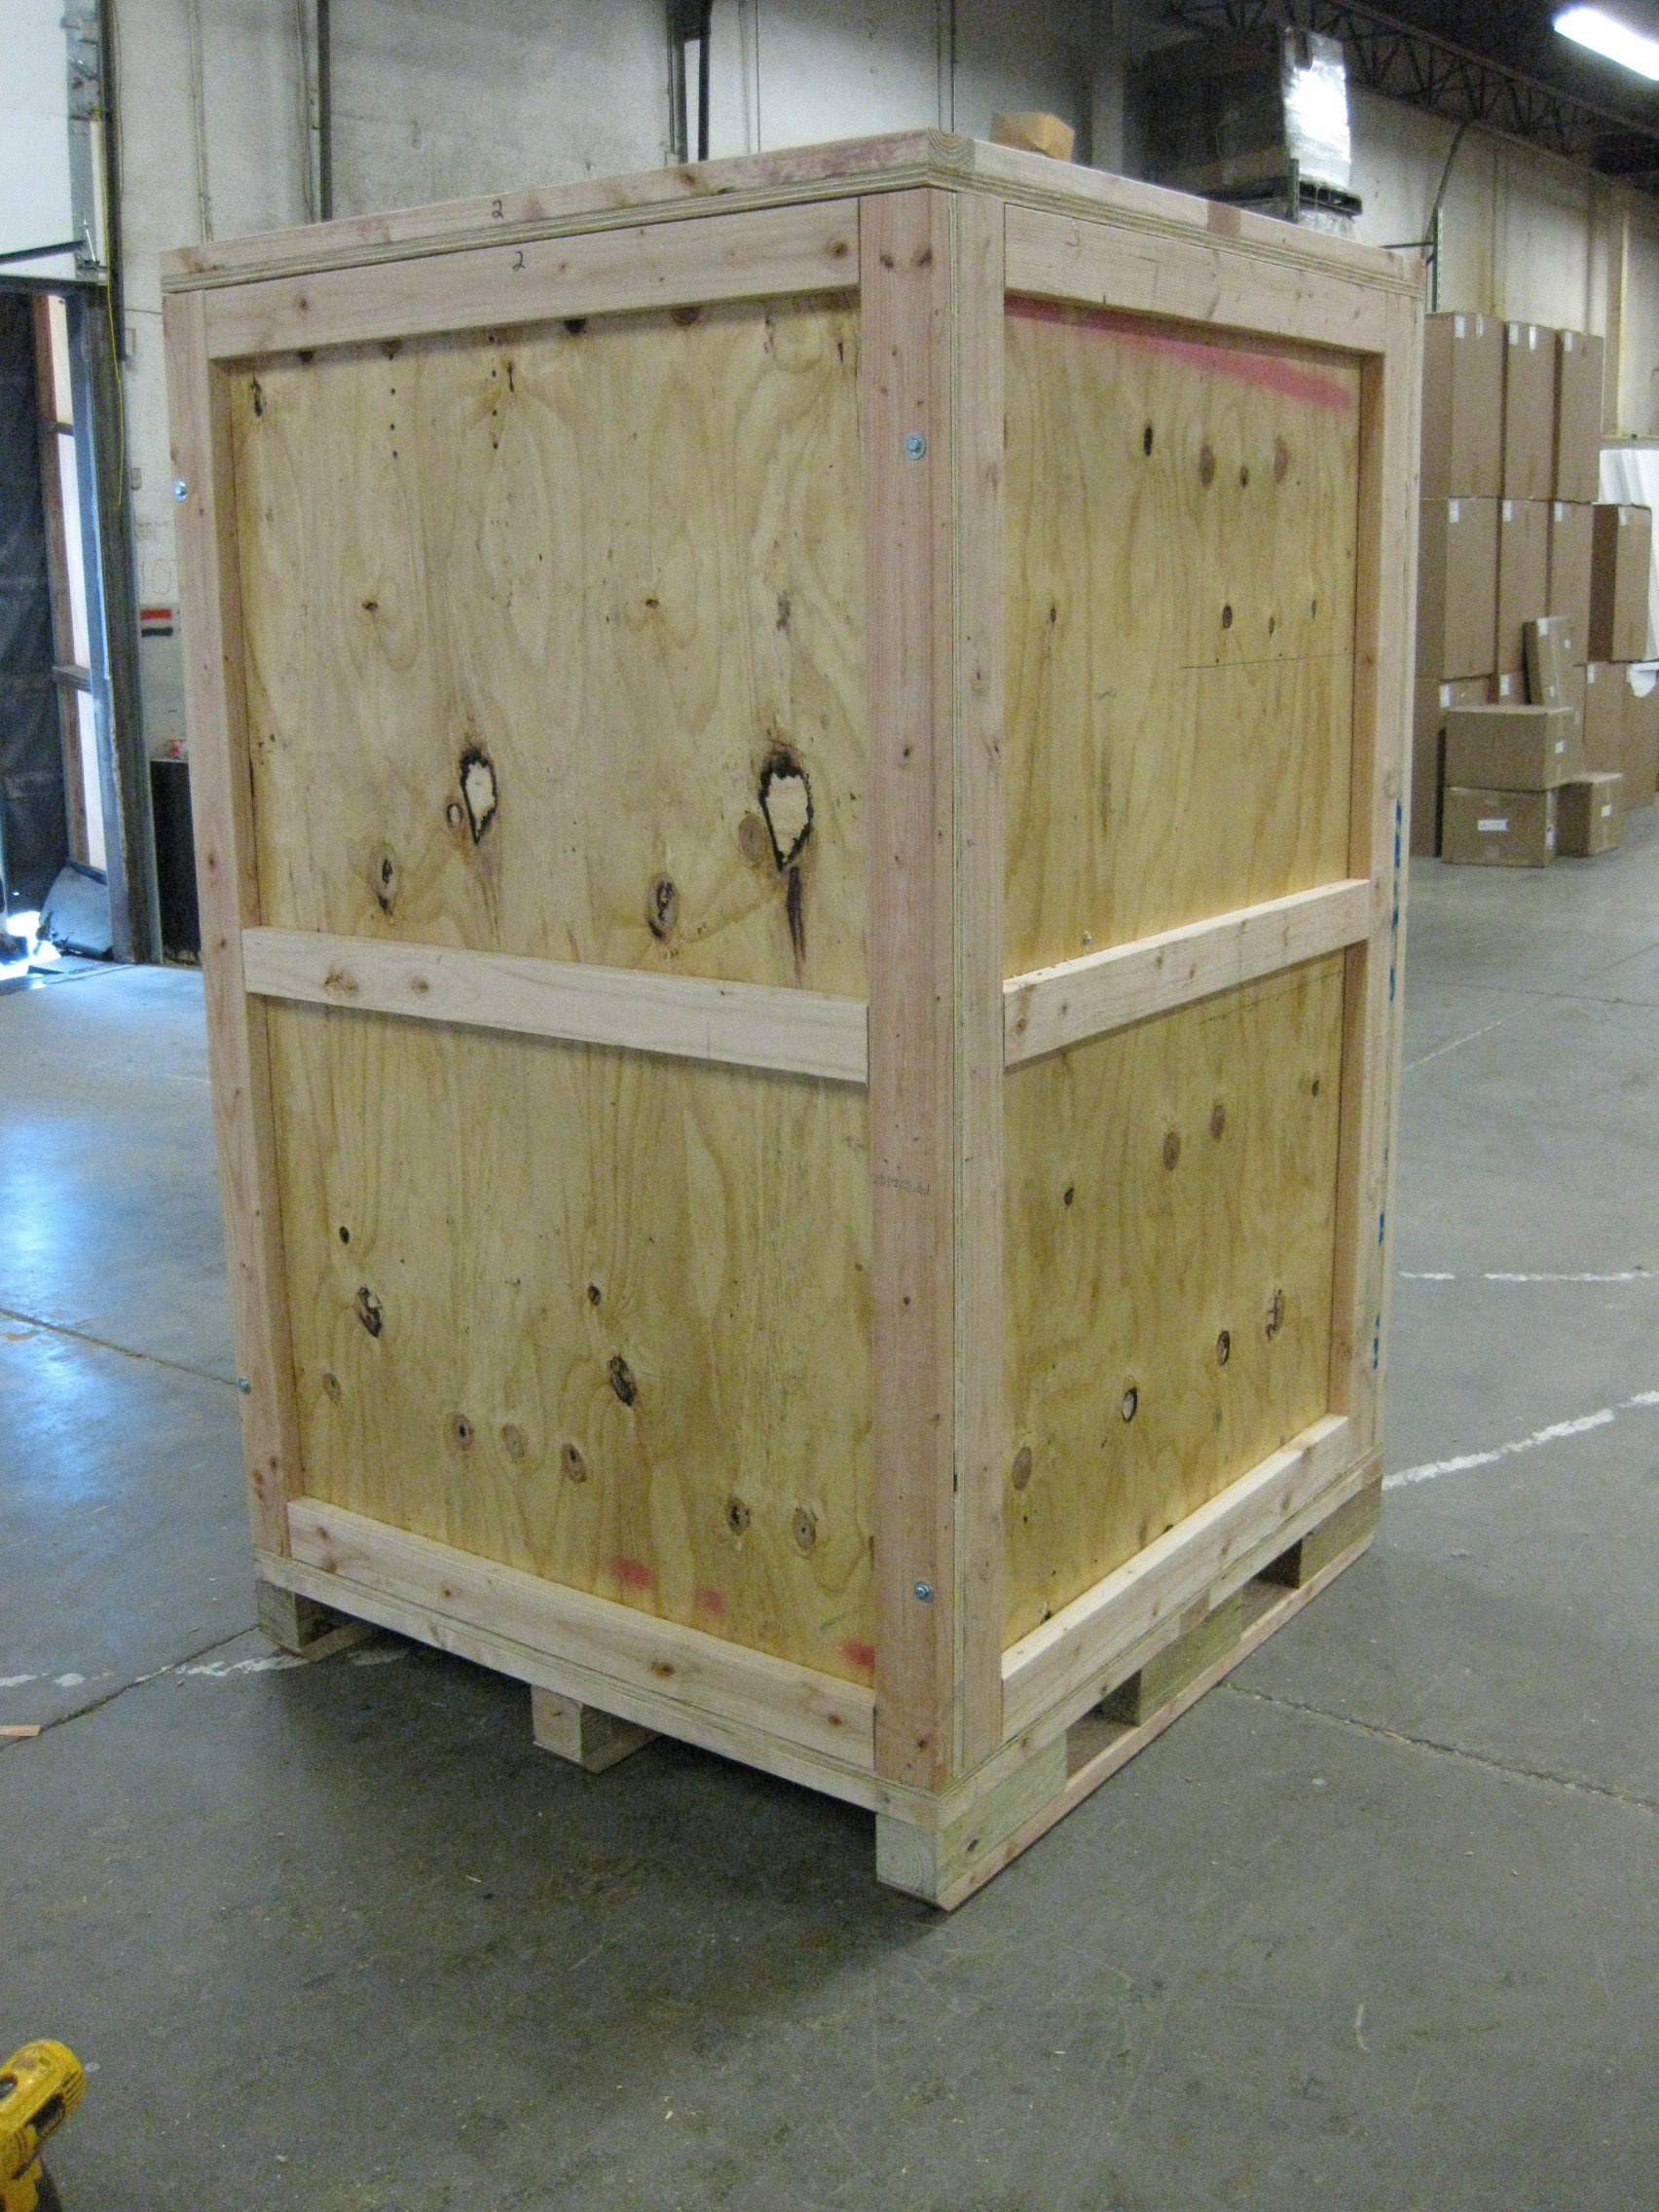 We offer sturdier options for when a crate will be utilized on a regular basis and additional protection is required.